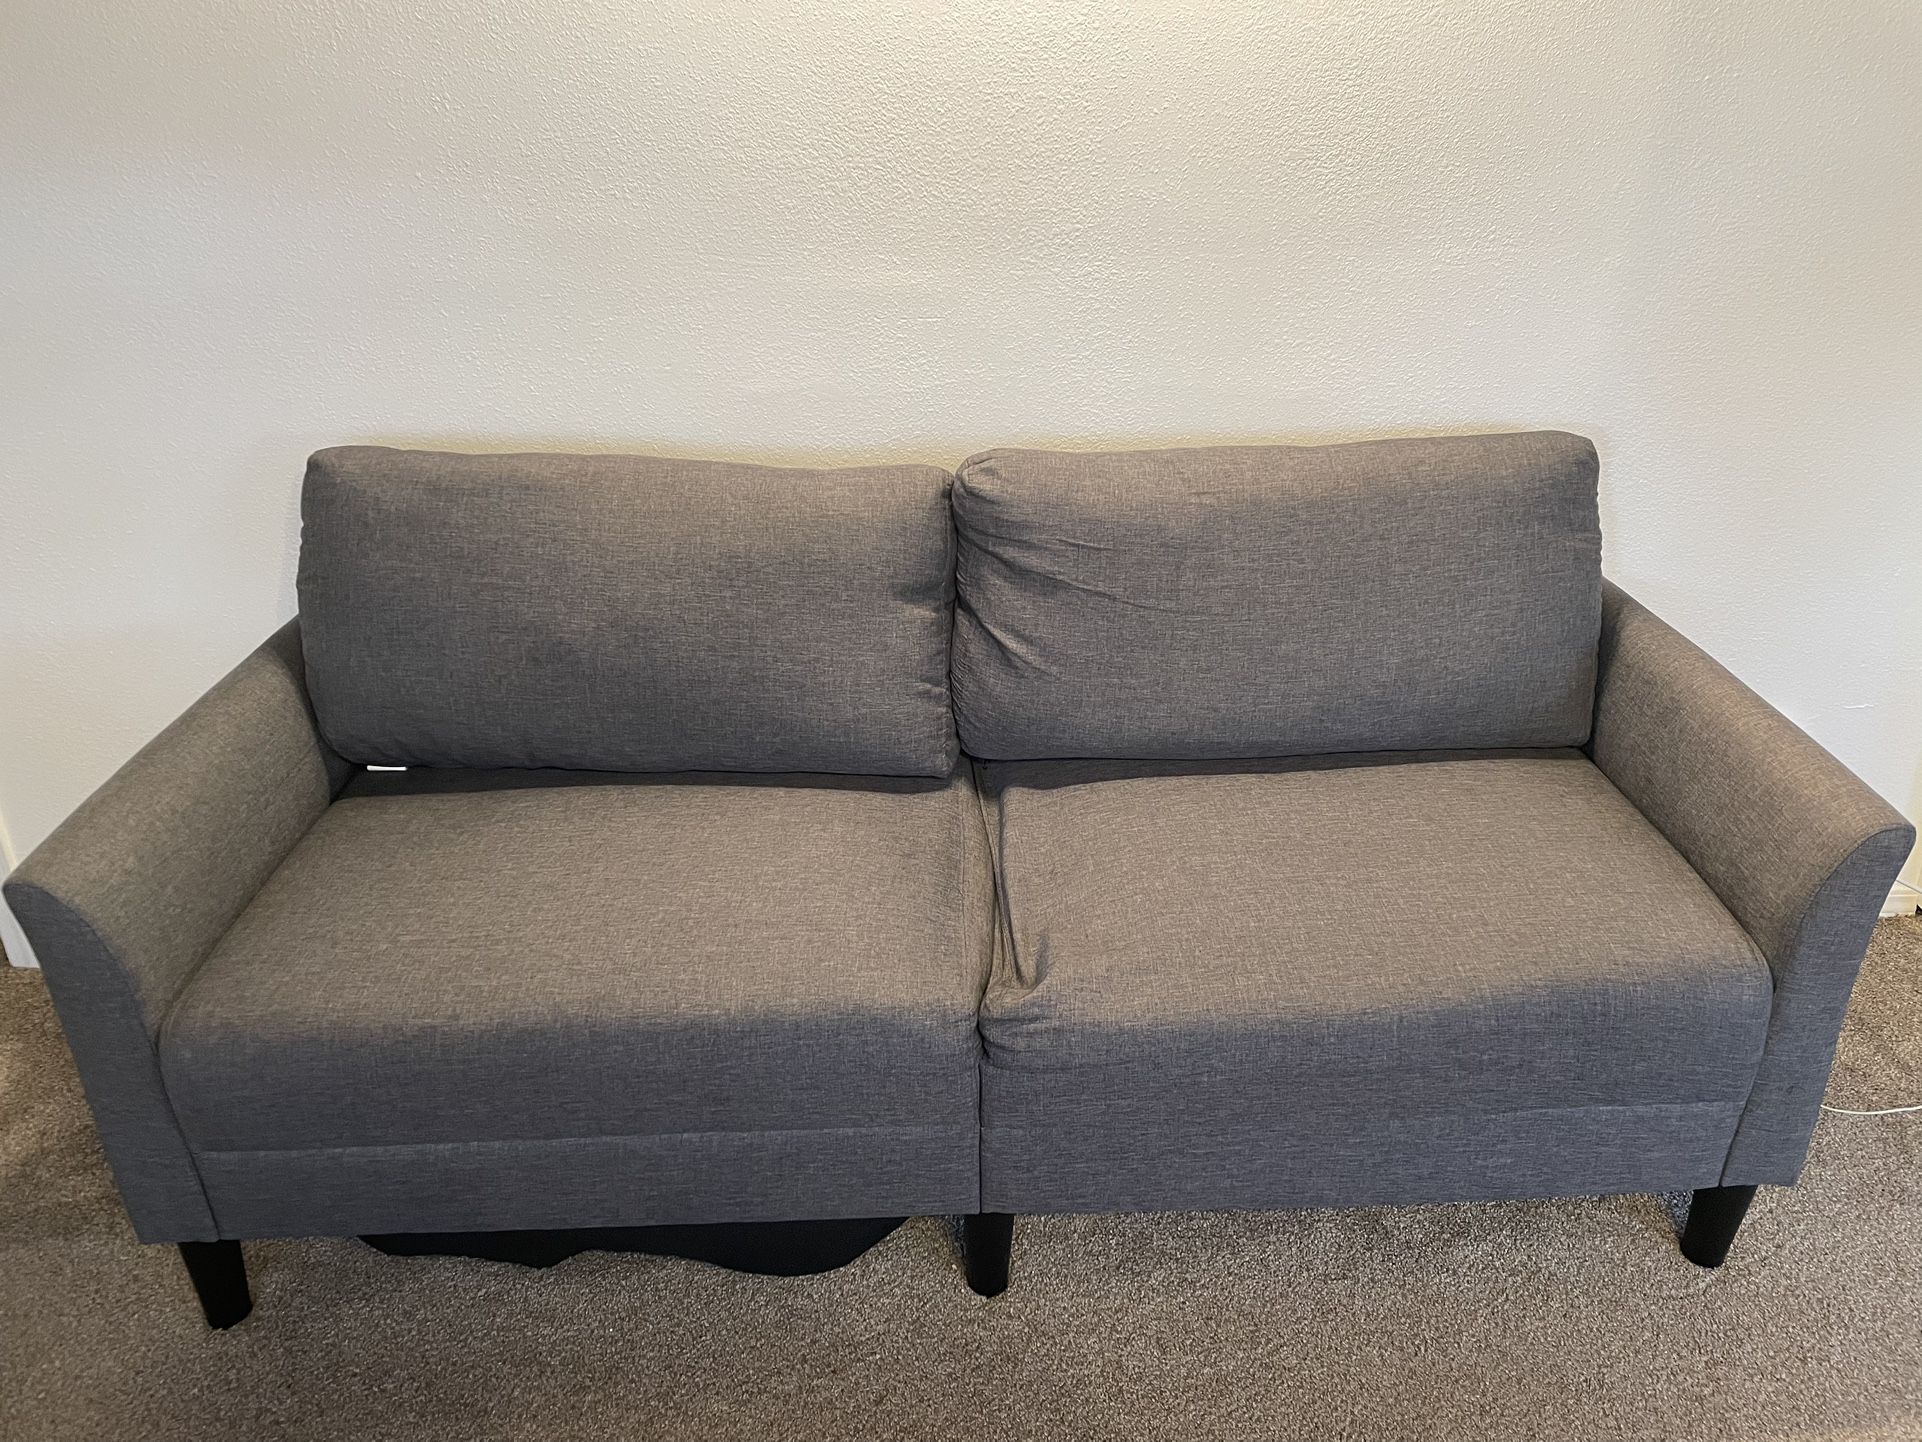 Small Couch For Sale